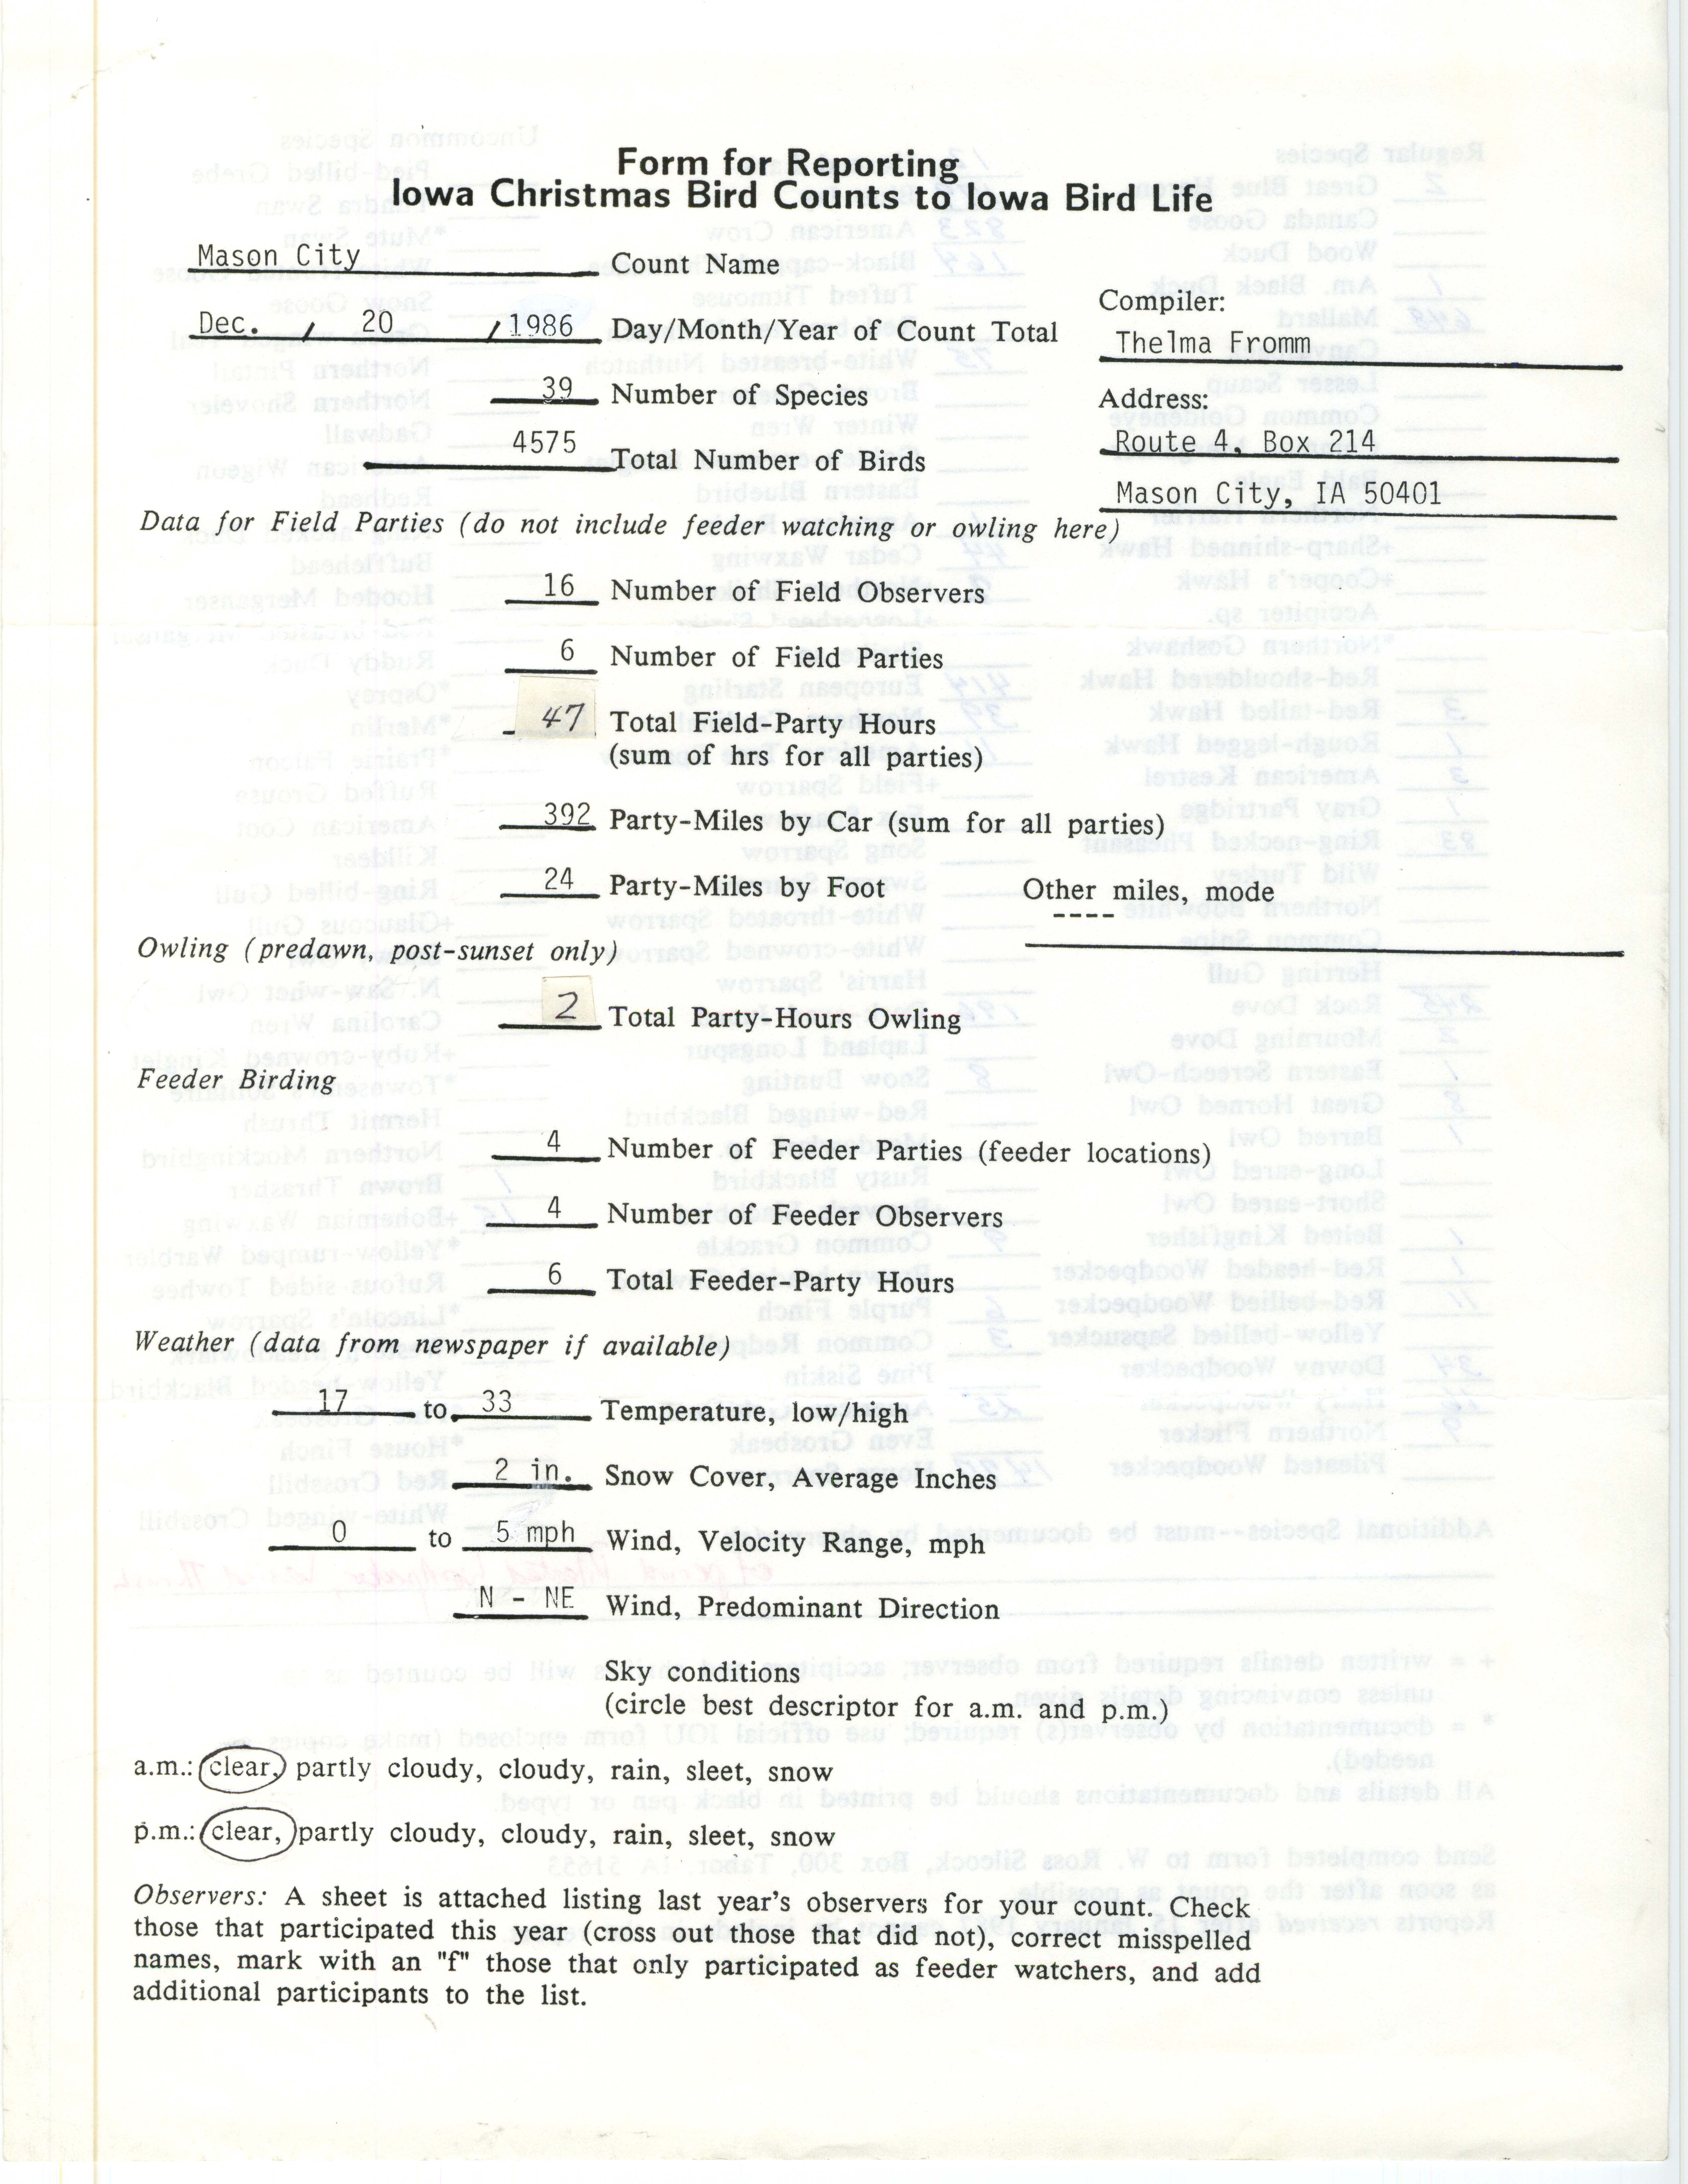 Form for reporting Iowa Christmas bird counts to Iowa Bird Life, Thelma Joy Fromm, December 20, 1986